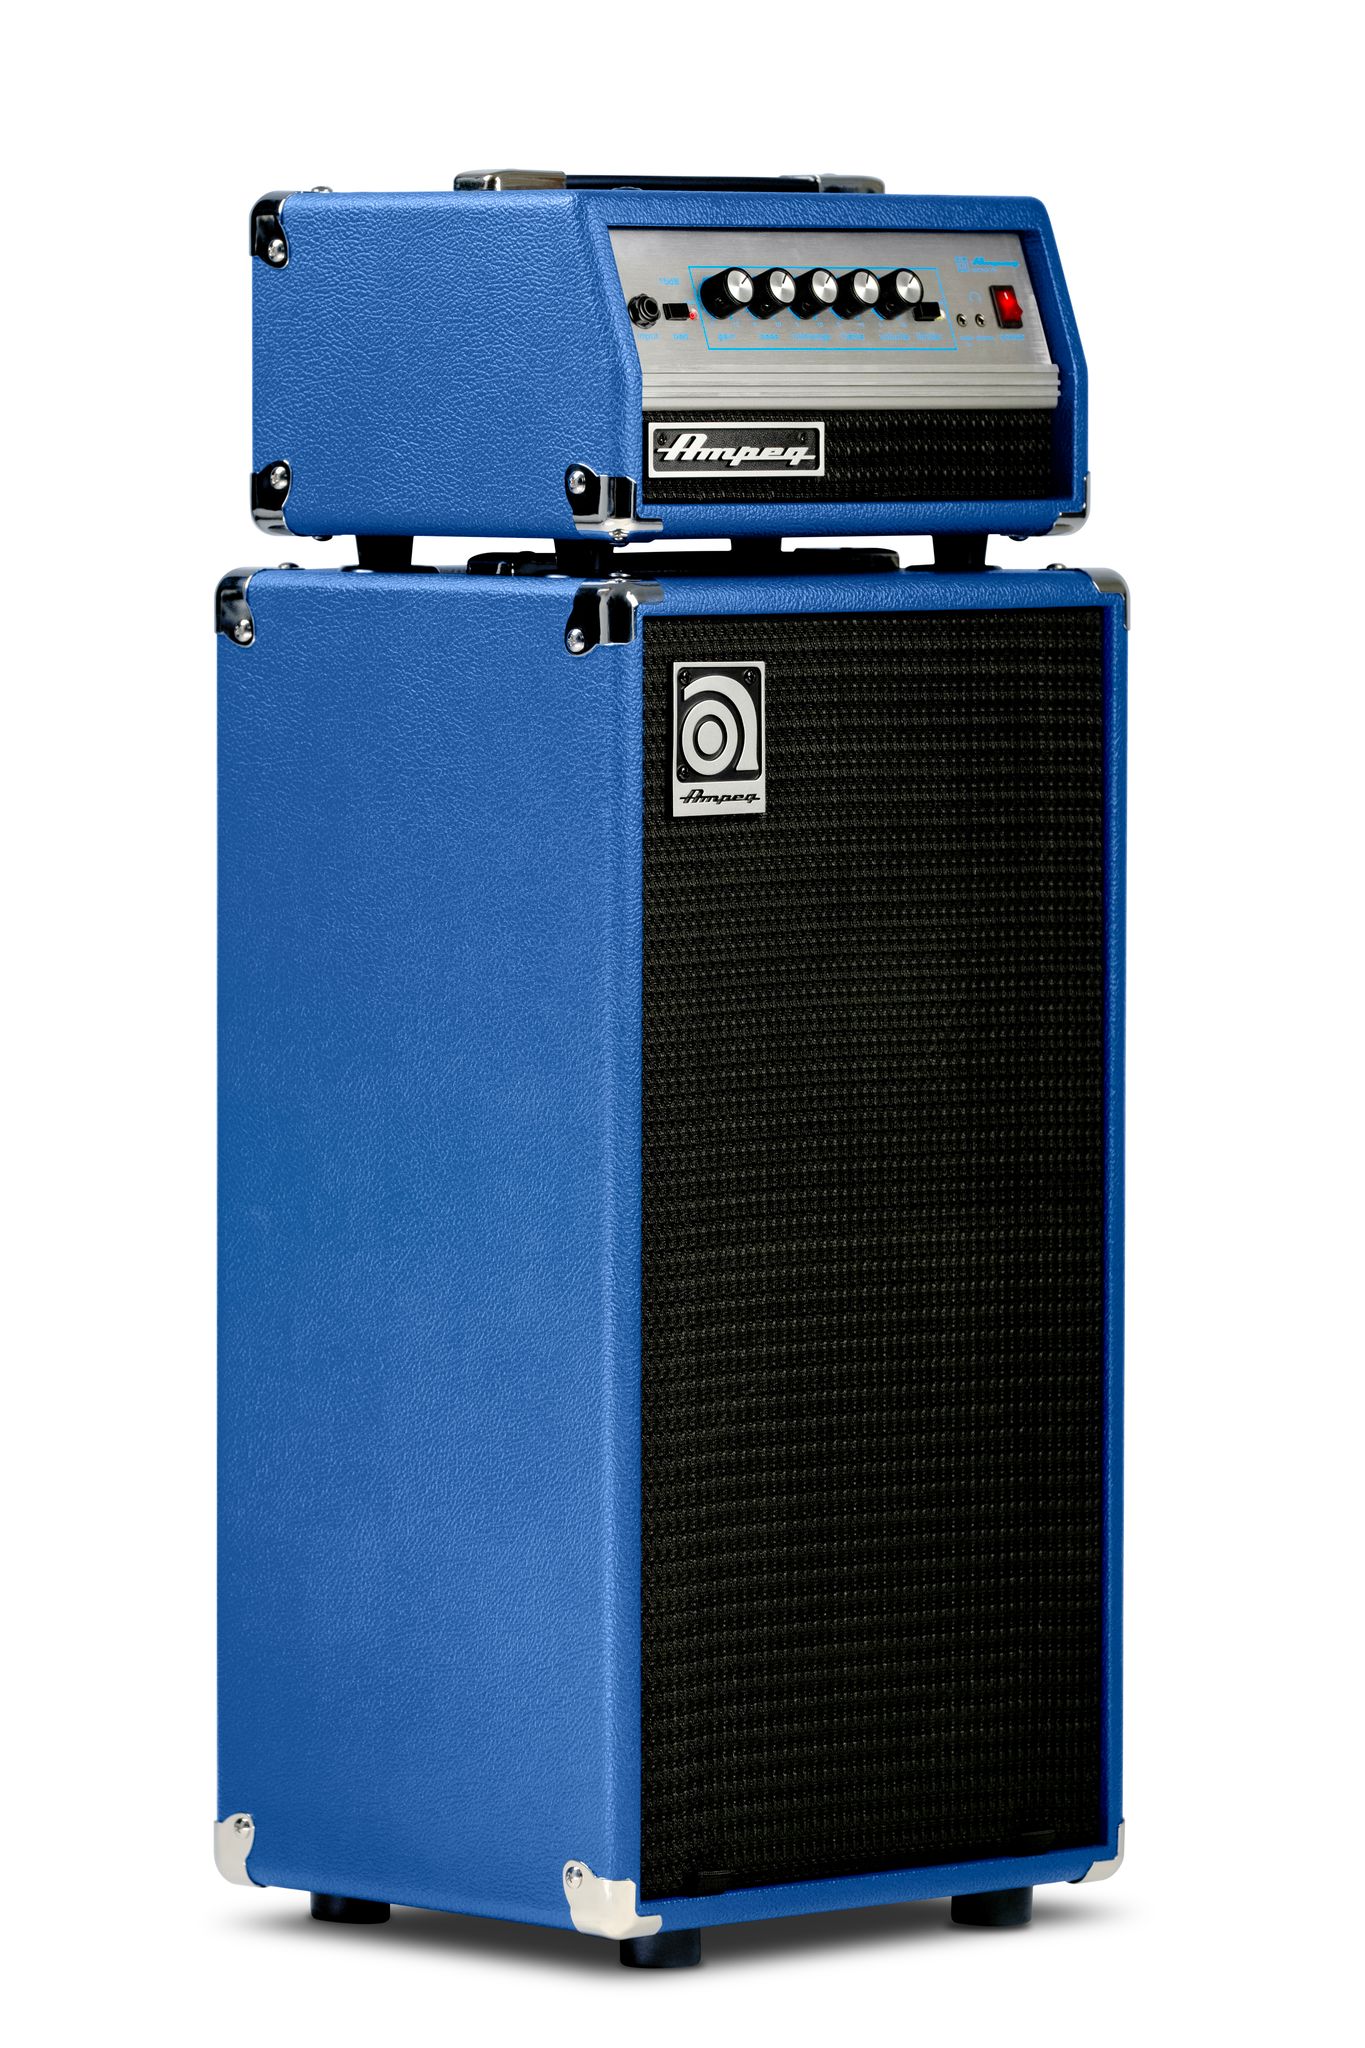 Ampeg Micro Vr Stack Blue Limited Edition 2x10 200w - Stack Ampli Basse - Variation 1